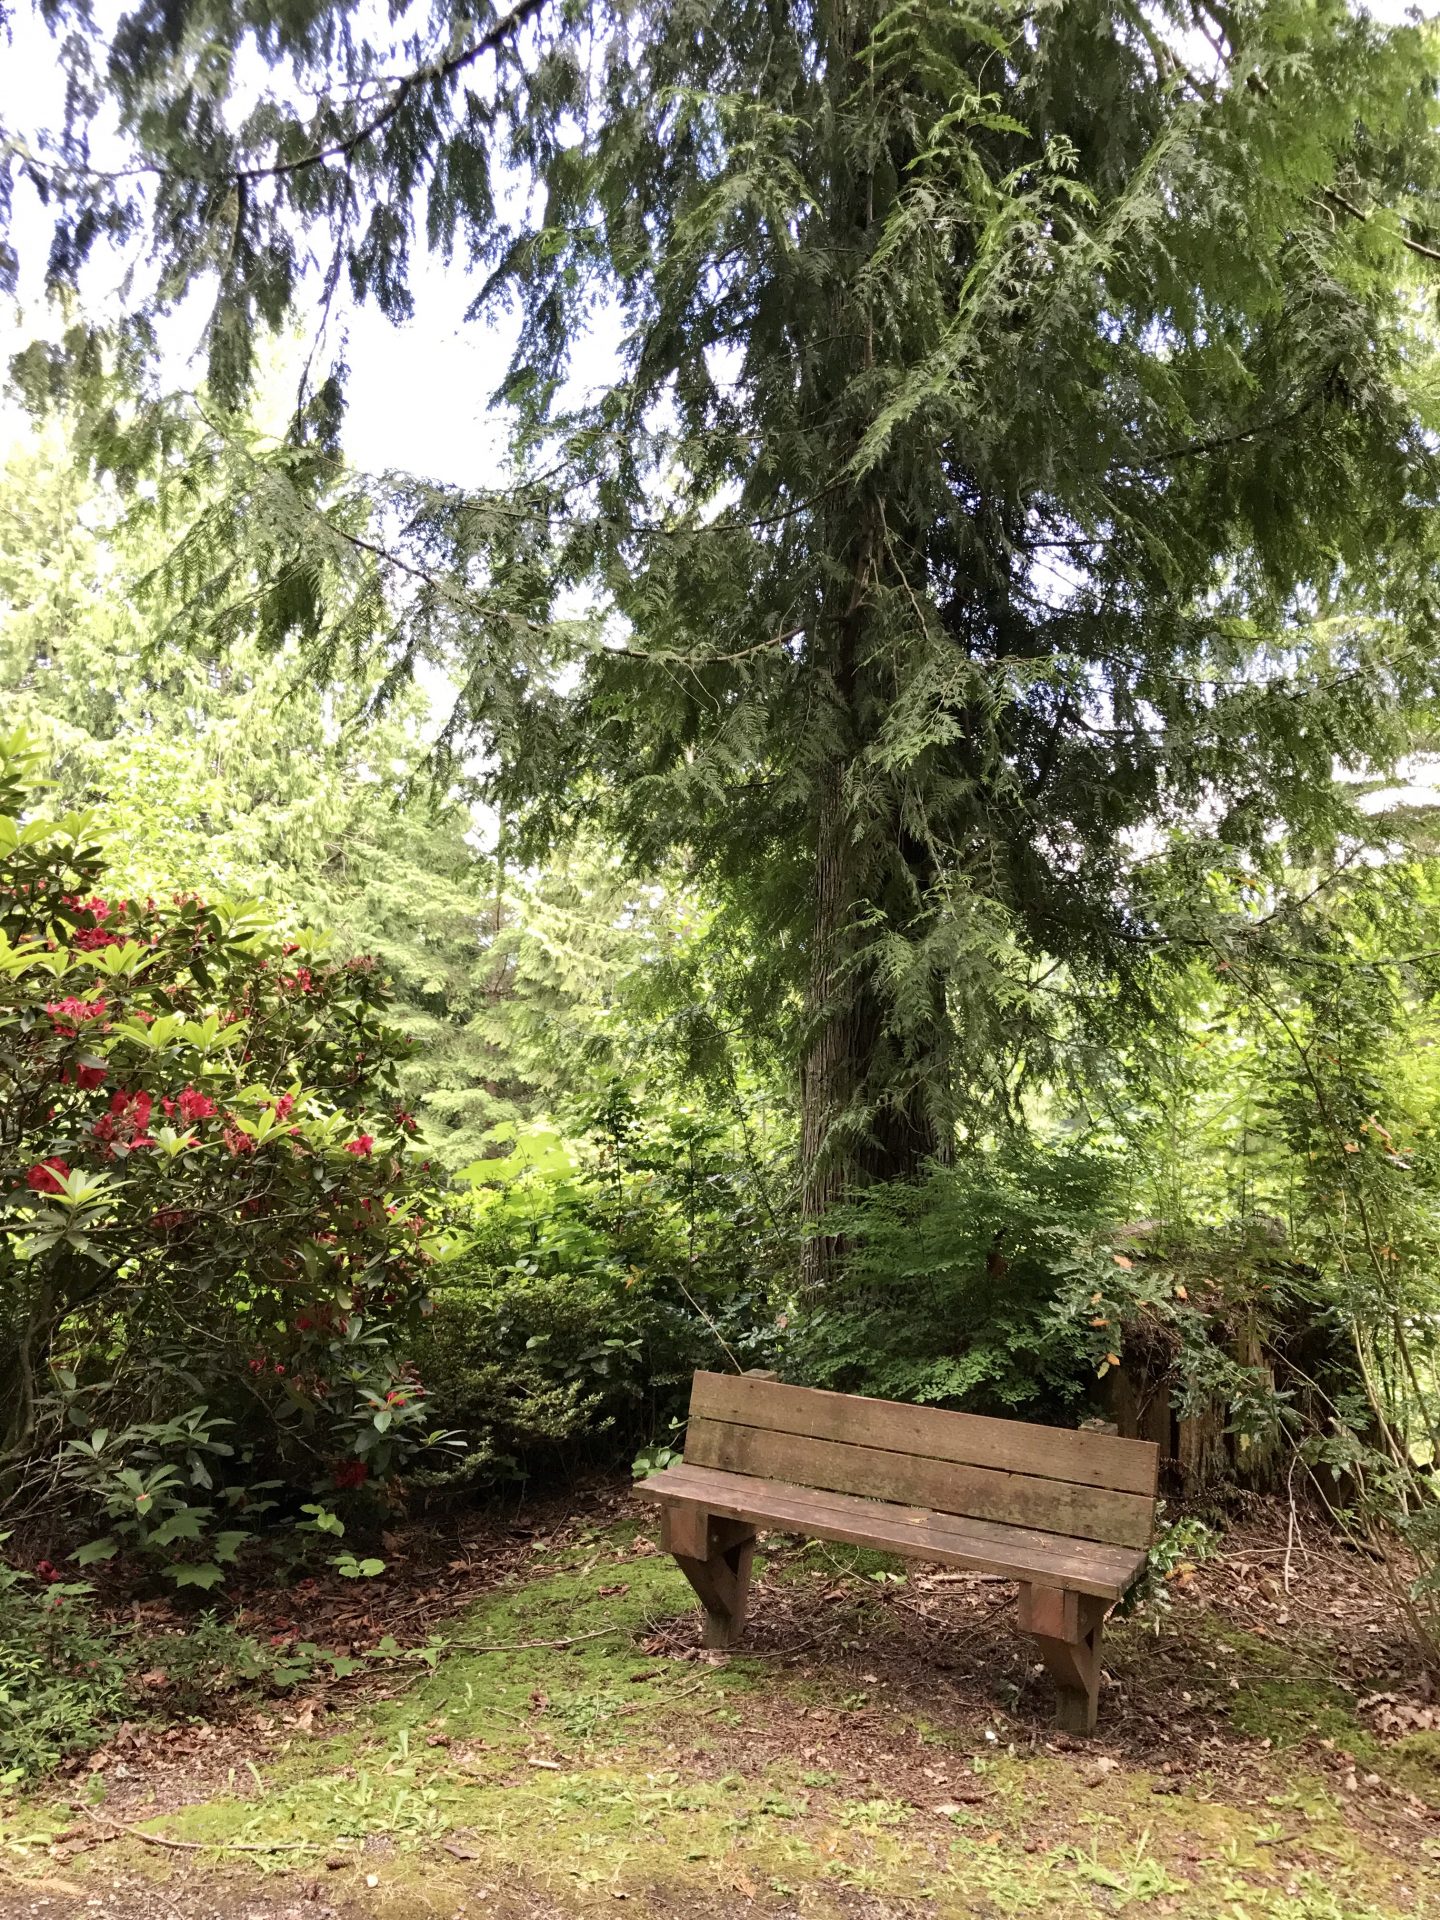 Relaxing places like this bench and a gazebo in the woods can be found sprinkled throughout Tall Chief RV Resort, inviting guests to slow down and enjoy nature.